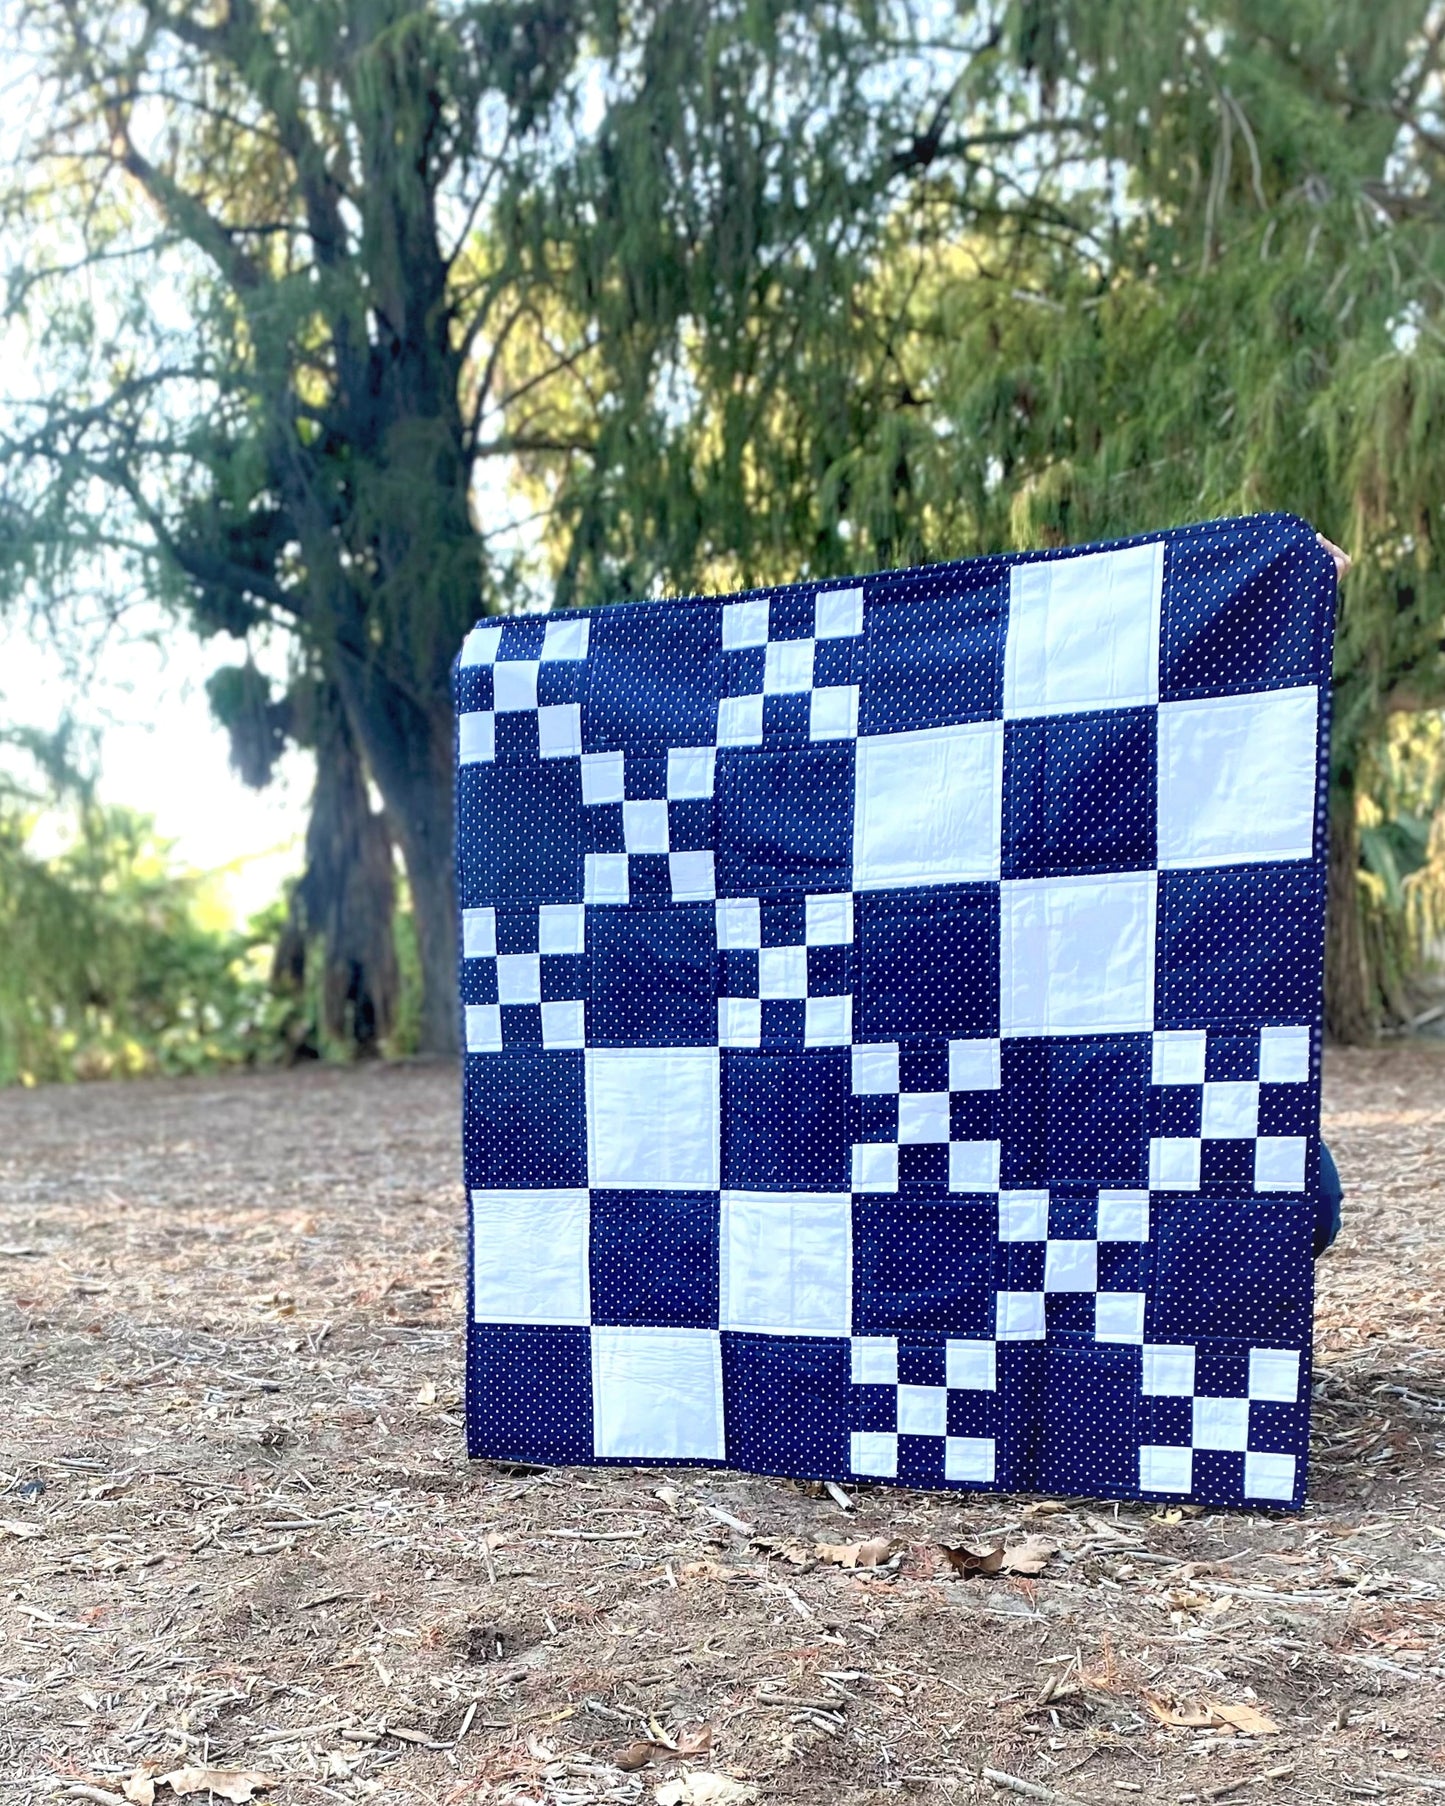 Checkers Quilt Pattern - PDF download